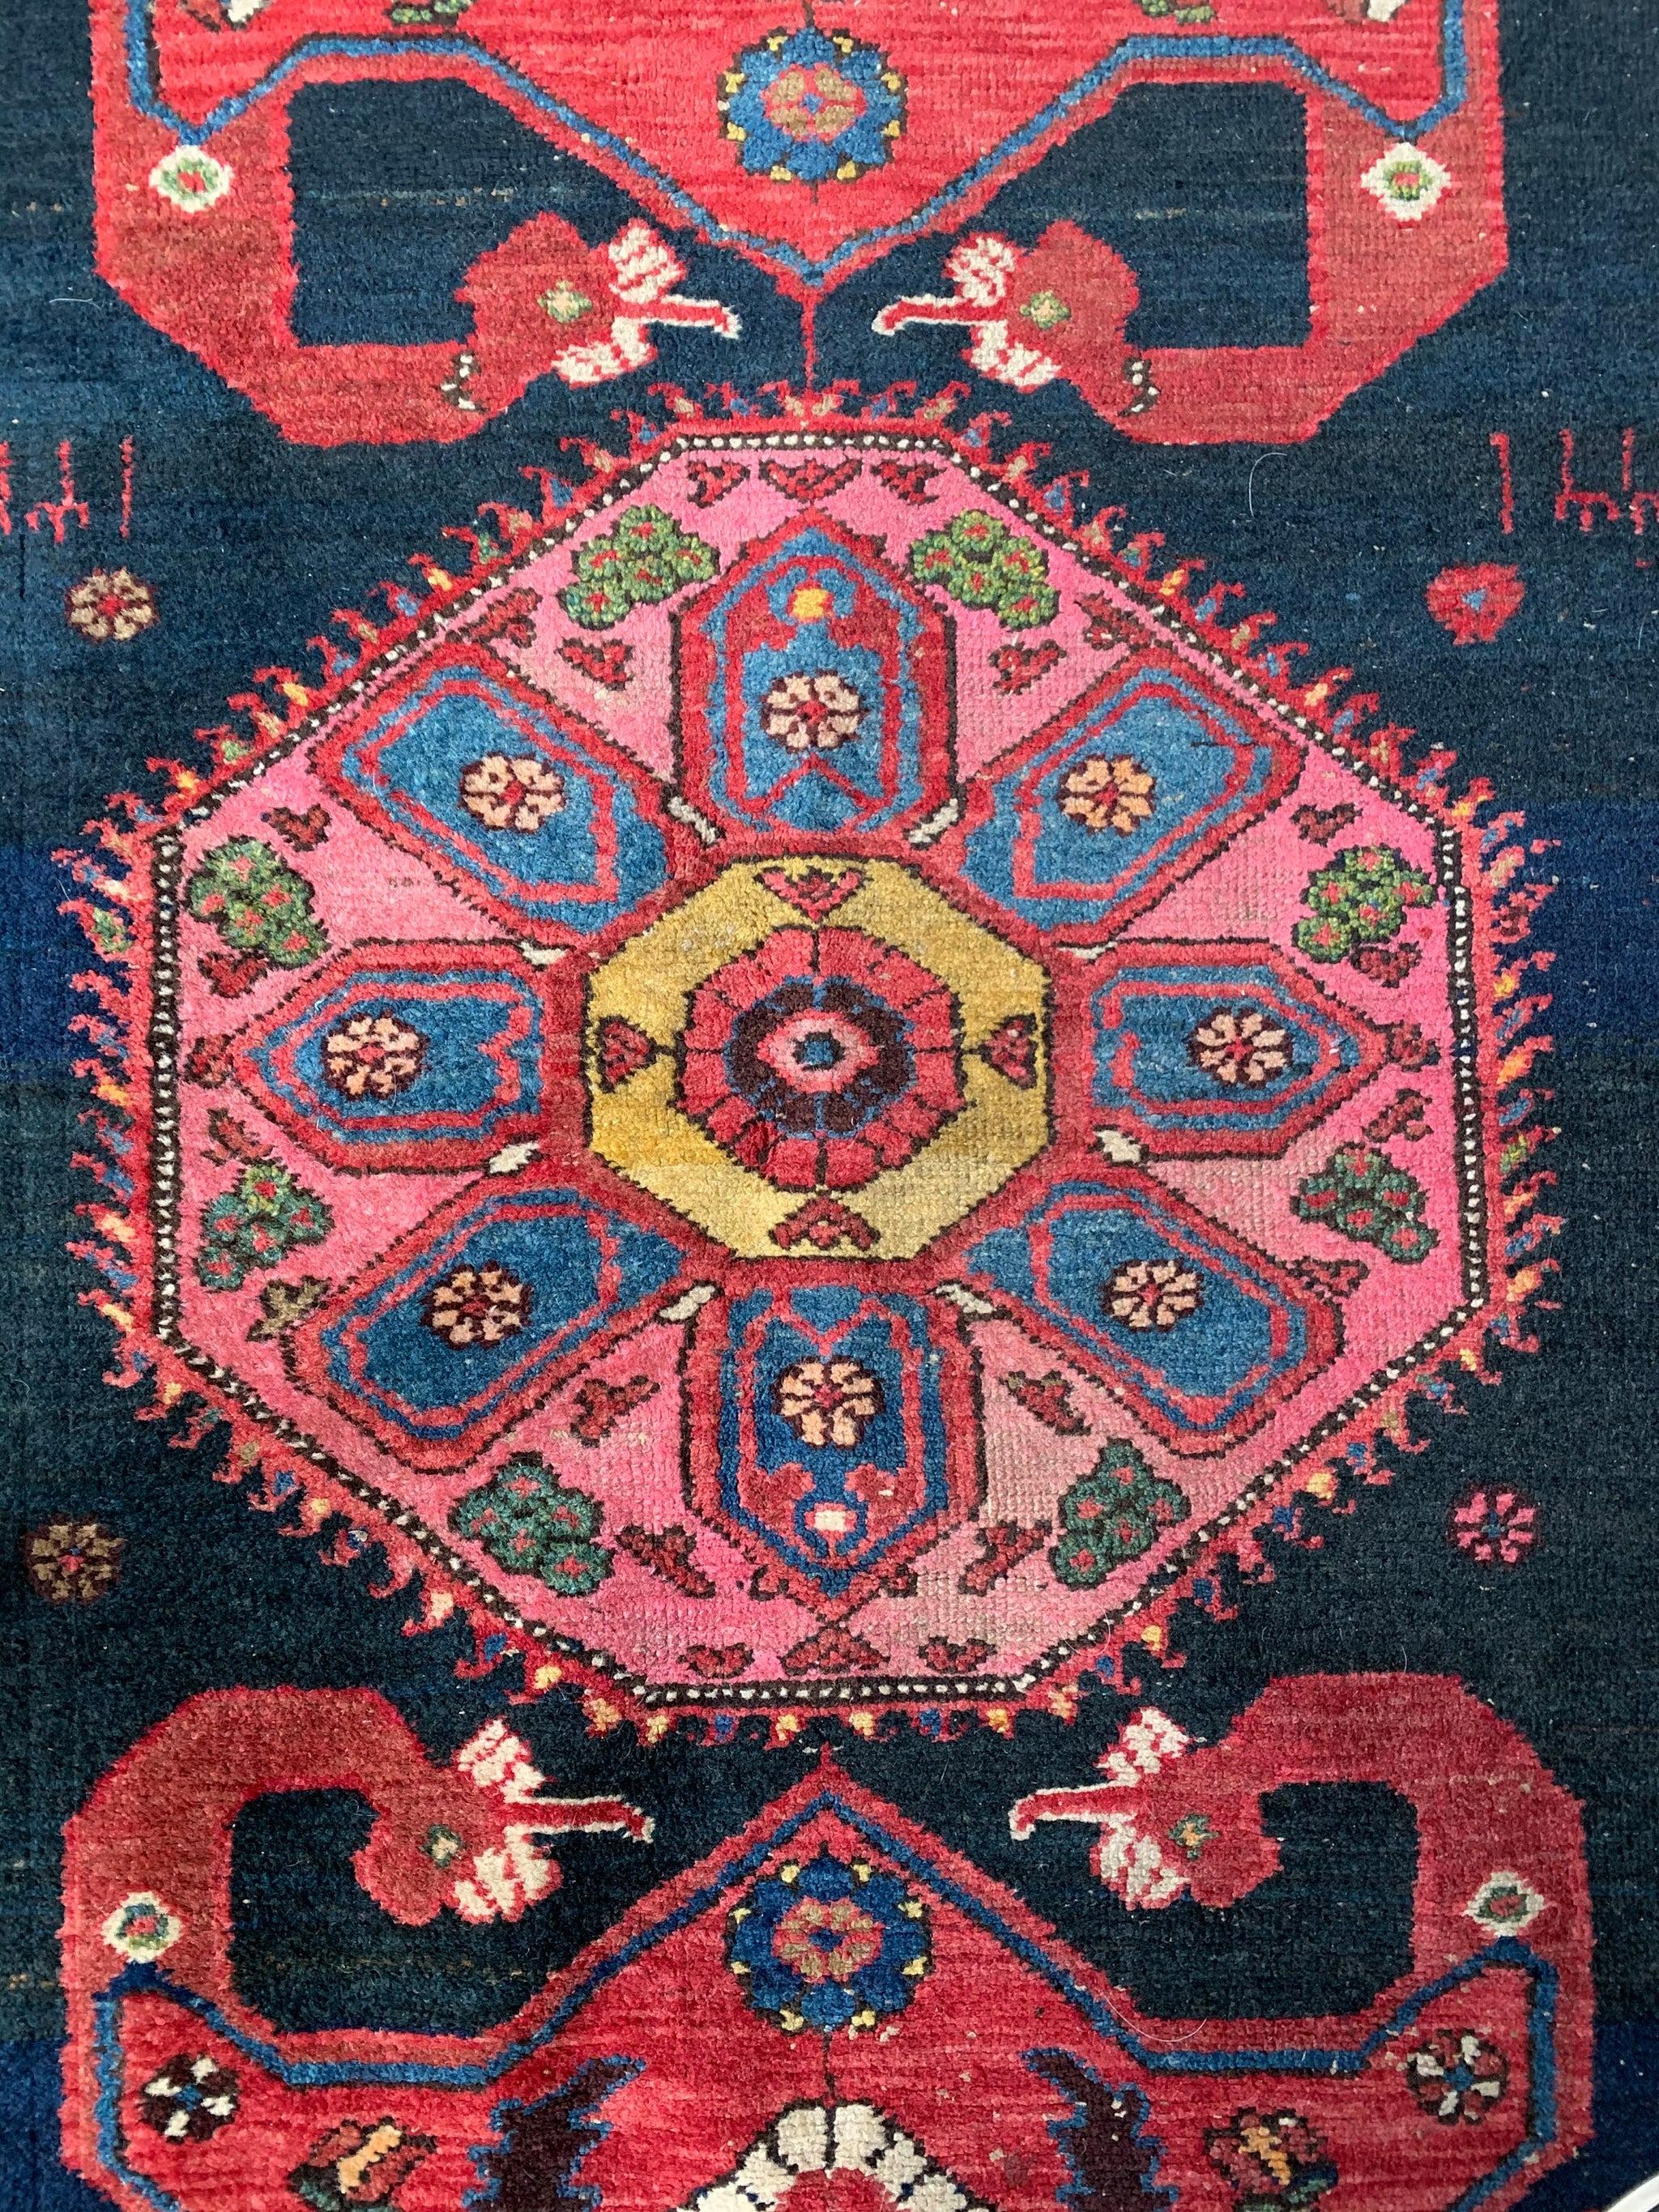 Prince Mysterious Dated Tribal Antique Rug

About: Super mysterious antique rug woven in the villages of the epicenter of rug weaving. such a bold piece, from the imbalanced sizes of the motifs to the choice of color throughout the rug. this rug